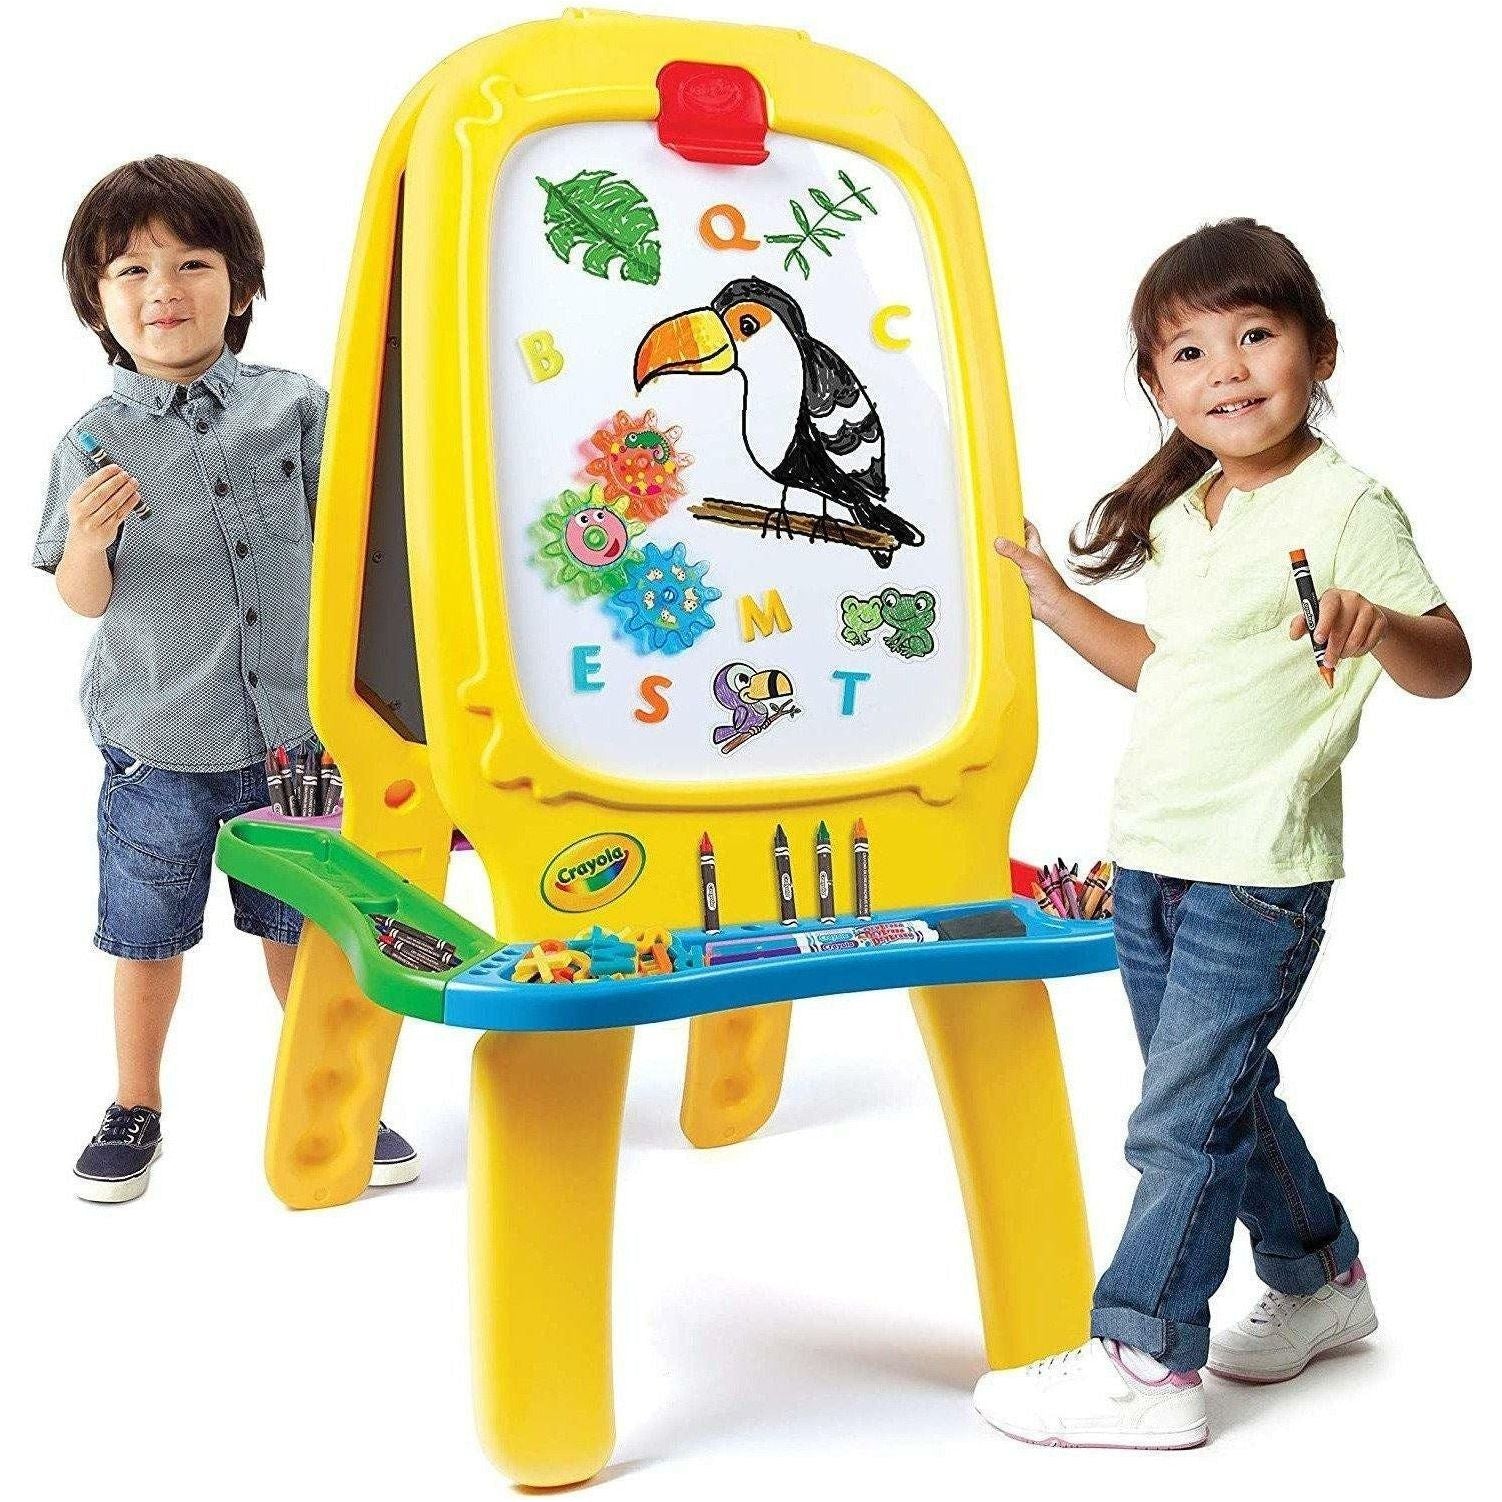 Crayola Deluxe Magnetic Double Whita And Black Board - BumbleToys - 2-4 Years, Blackboards & Easels, Boys, Crayola, Desk, Eagle Plus, Girls